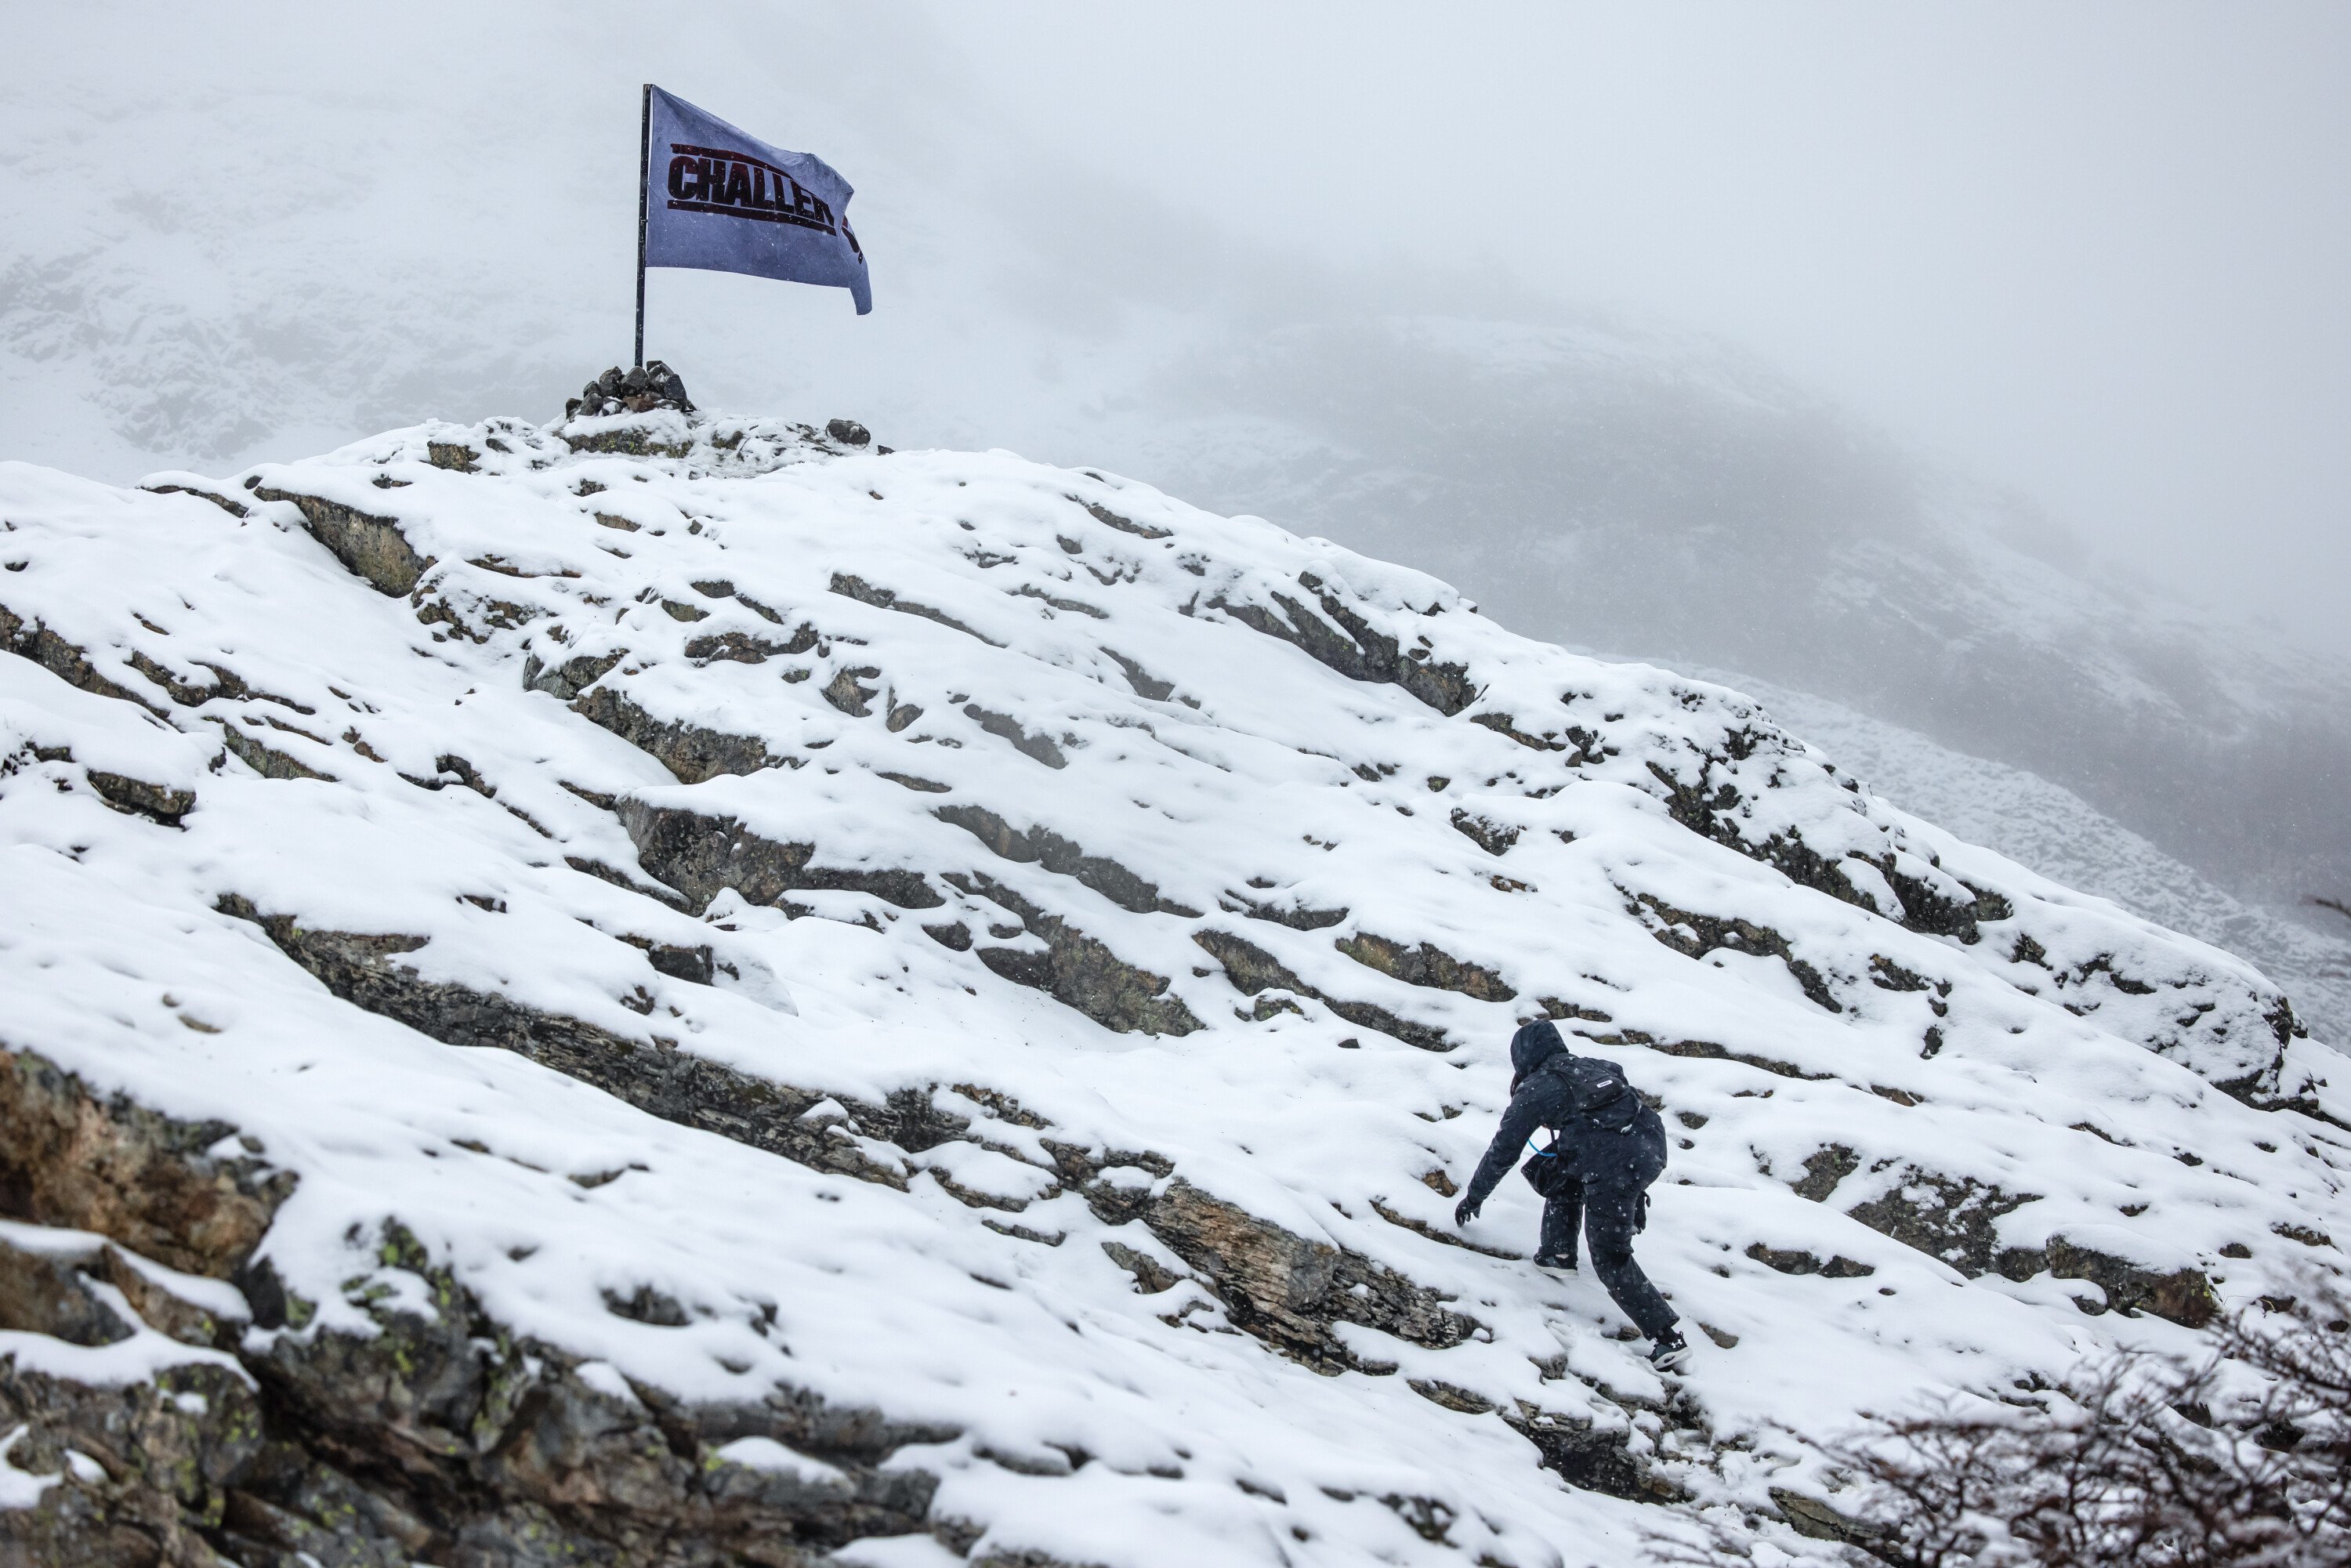 The Challenge flag on top of a mountain during 'The Challenge: USA' final